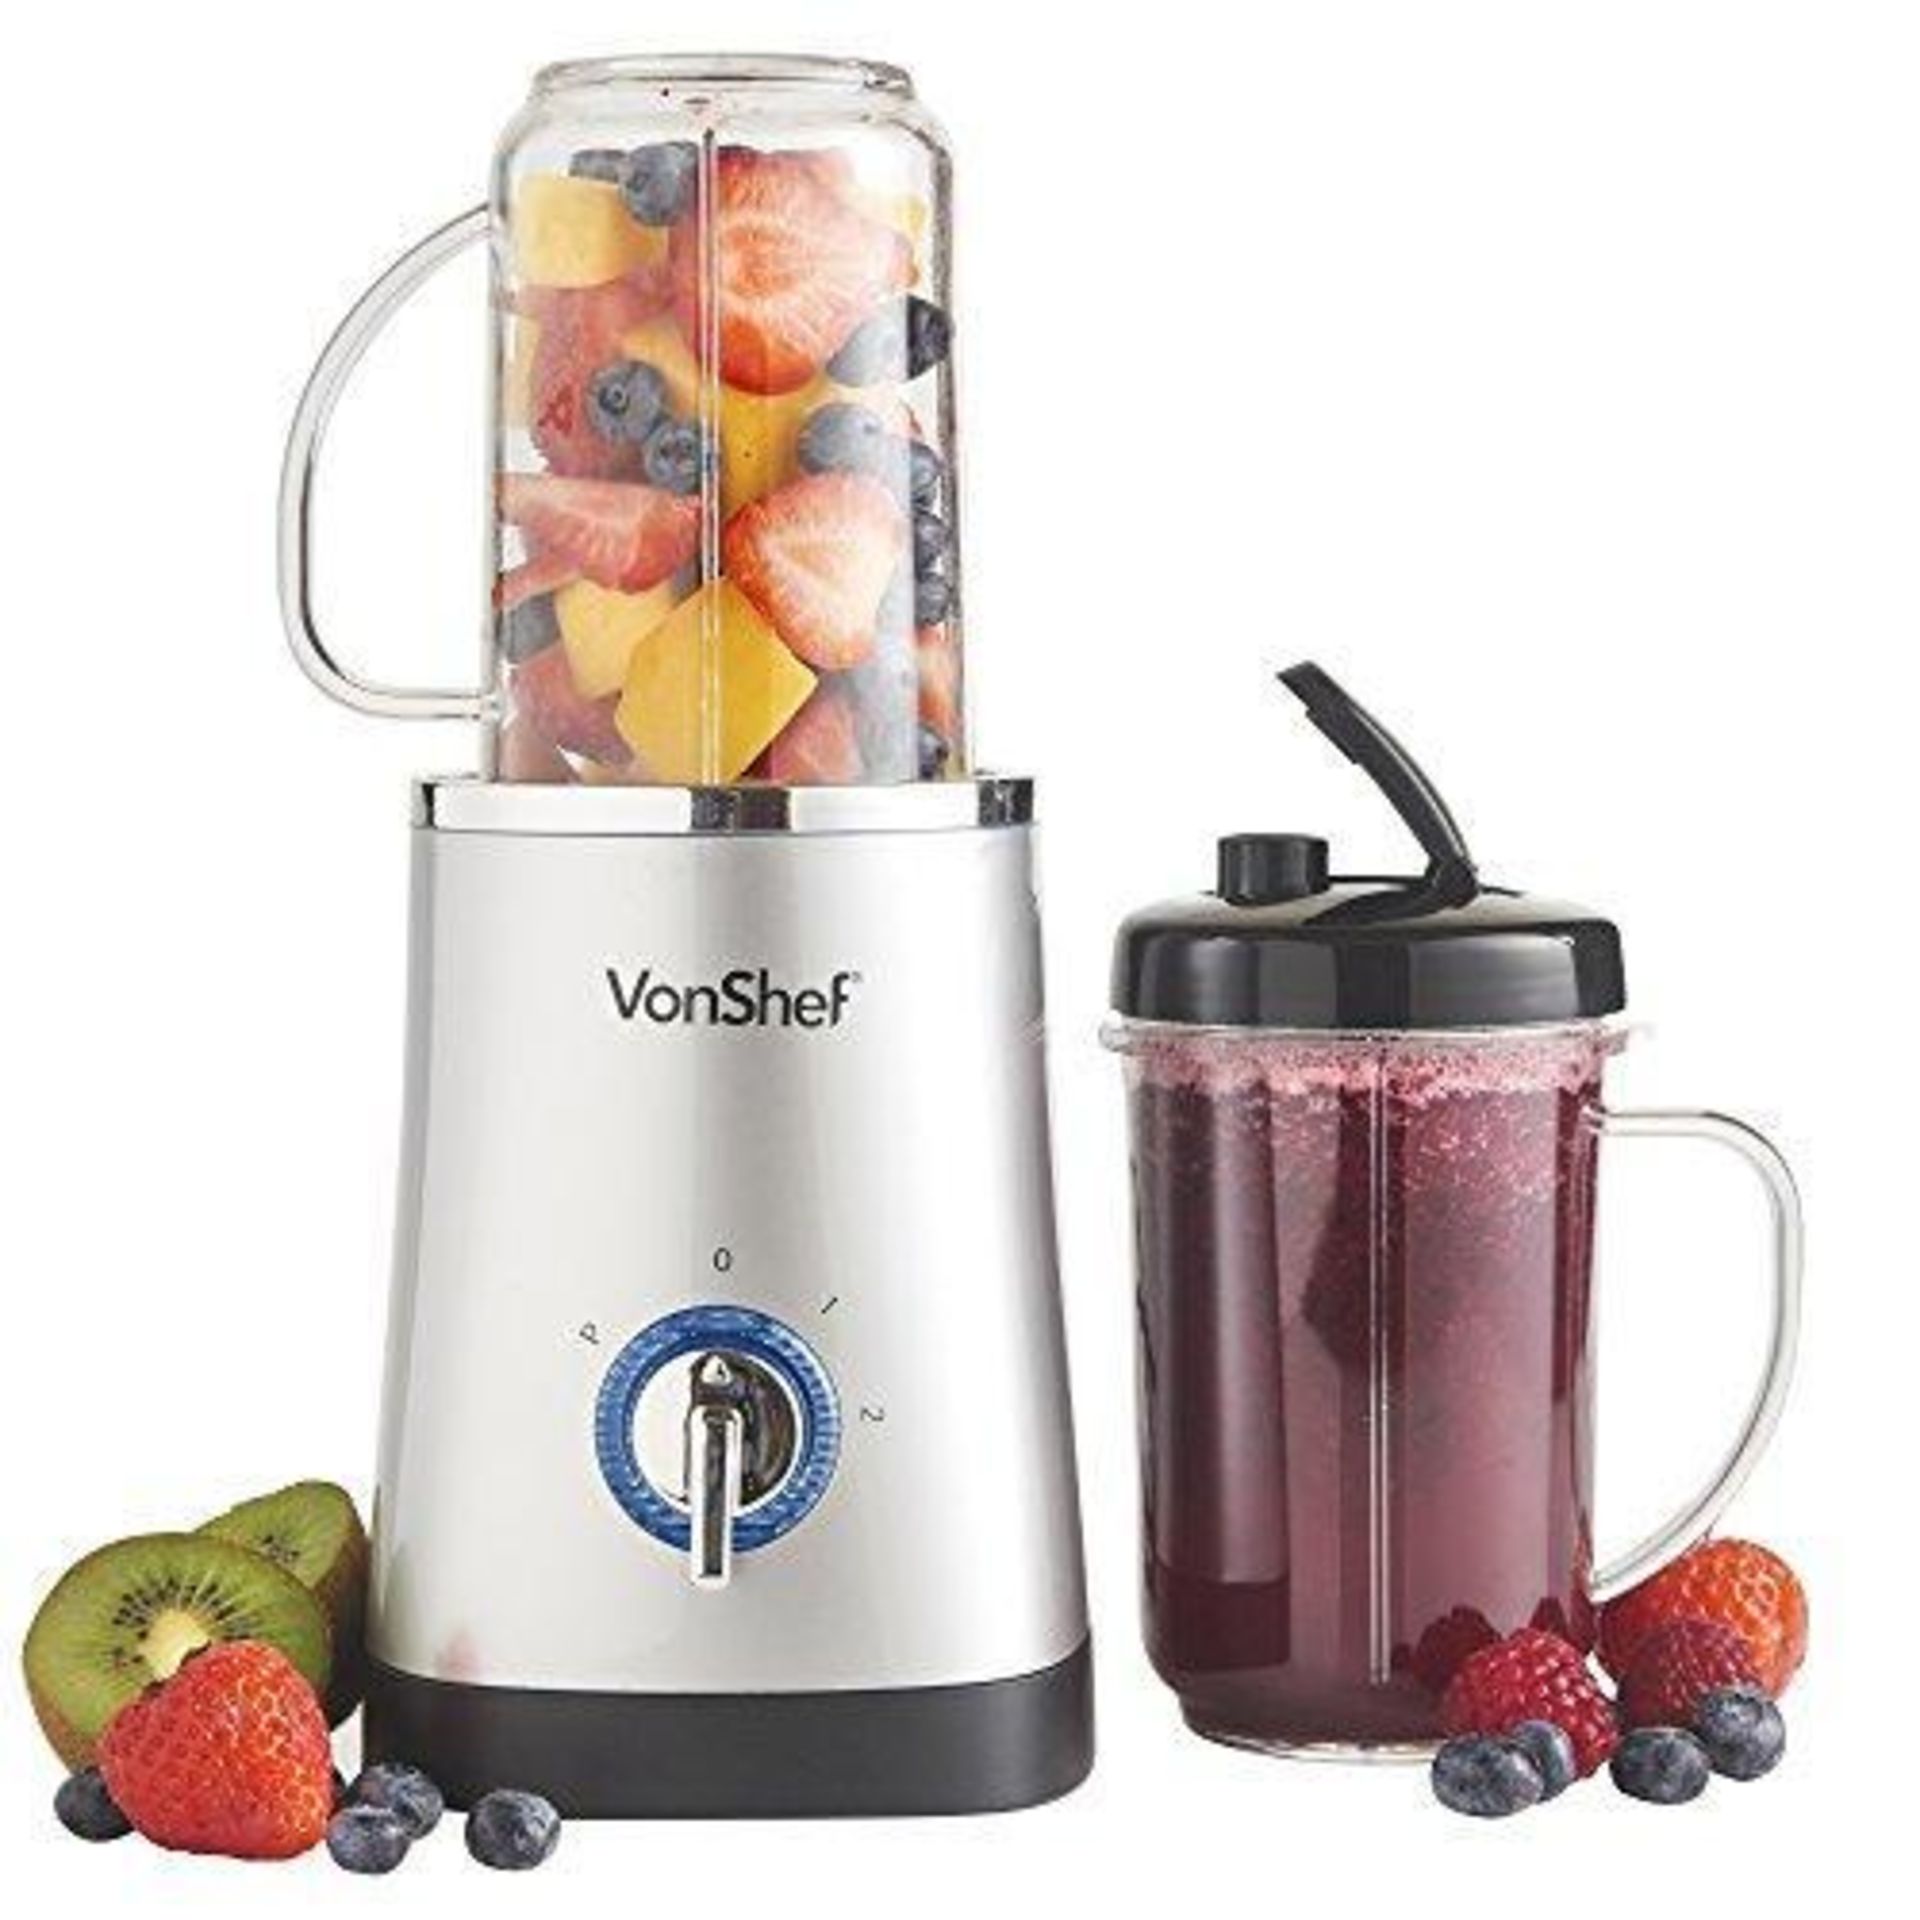 4-in-1 Blender - BI. 4-in-1 BlenderIncludes attachments for blending, grinding and juicing, as - Bild 5 aus 5